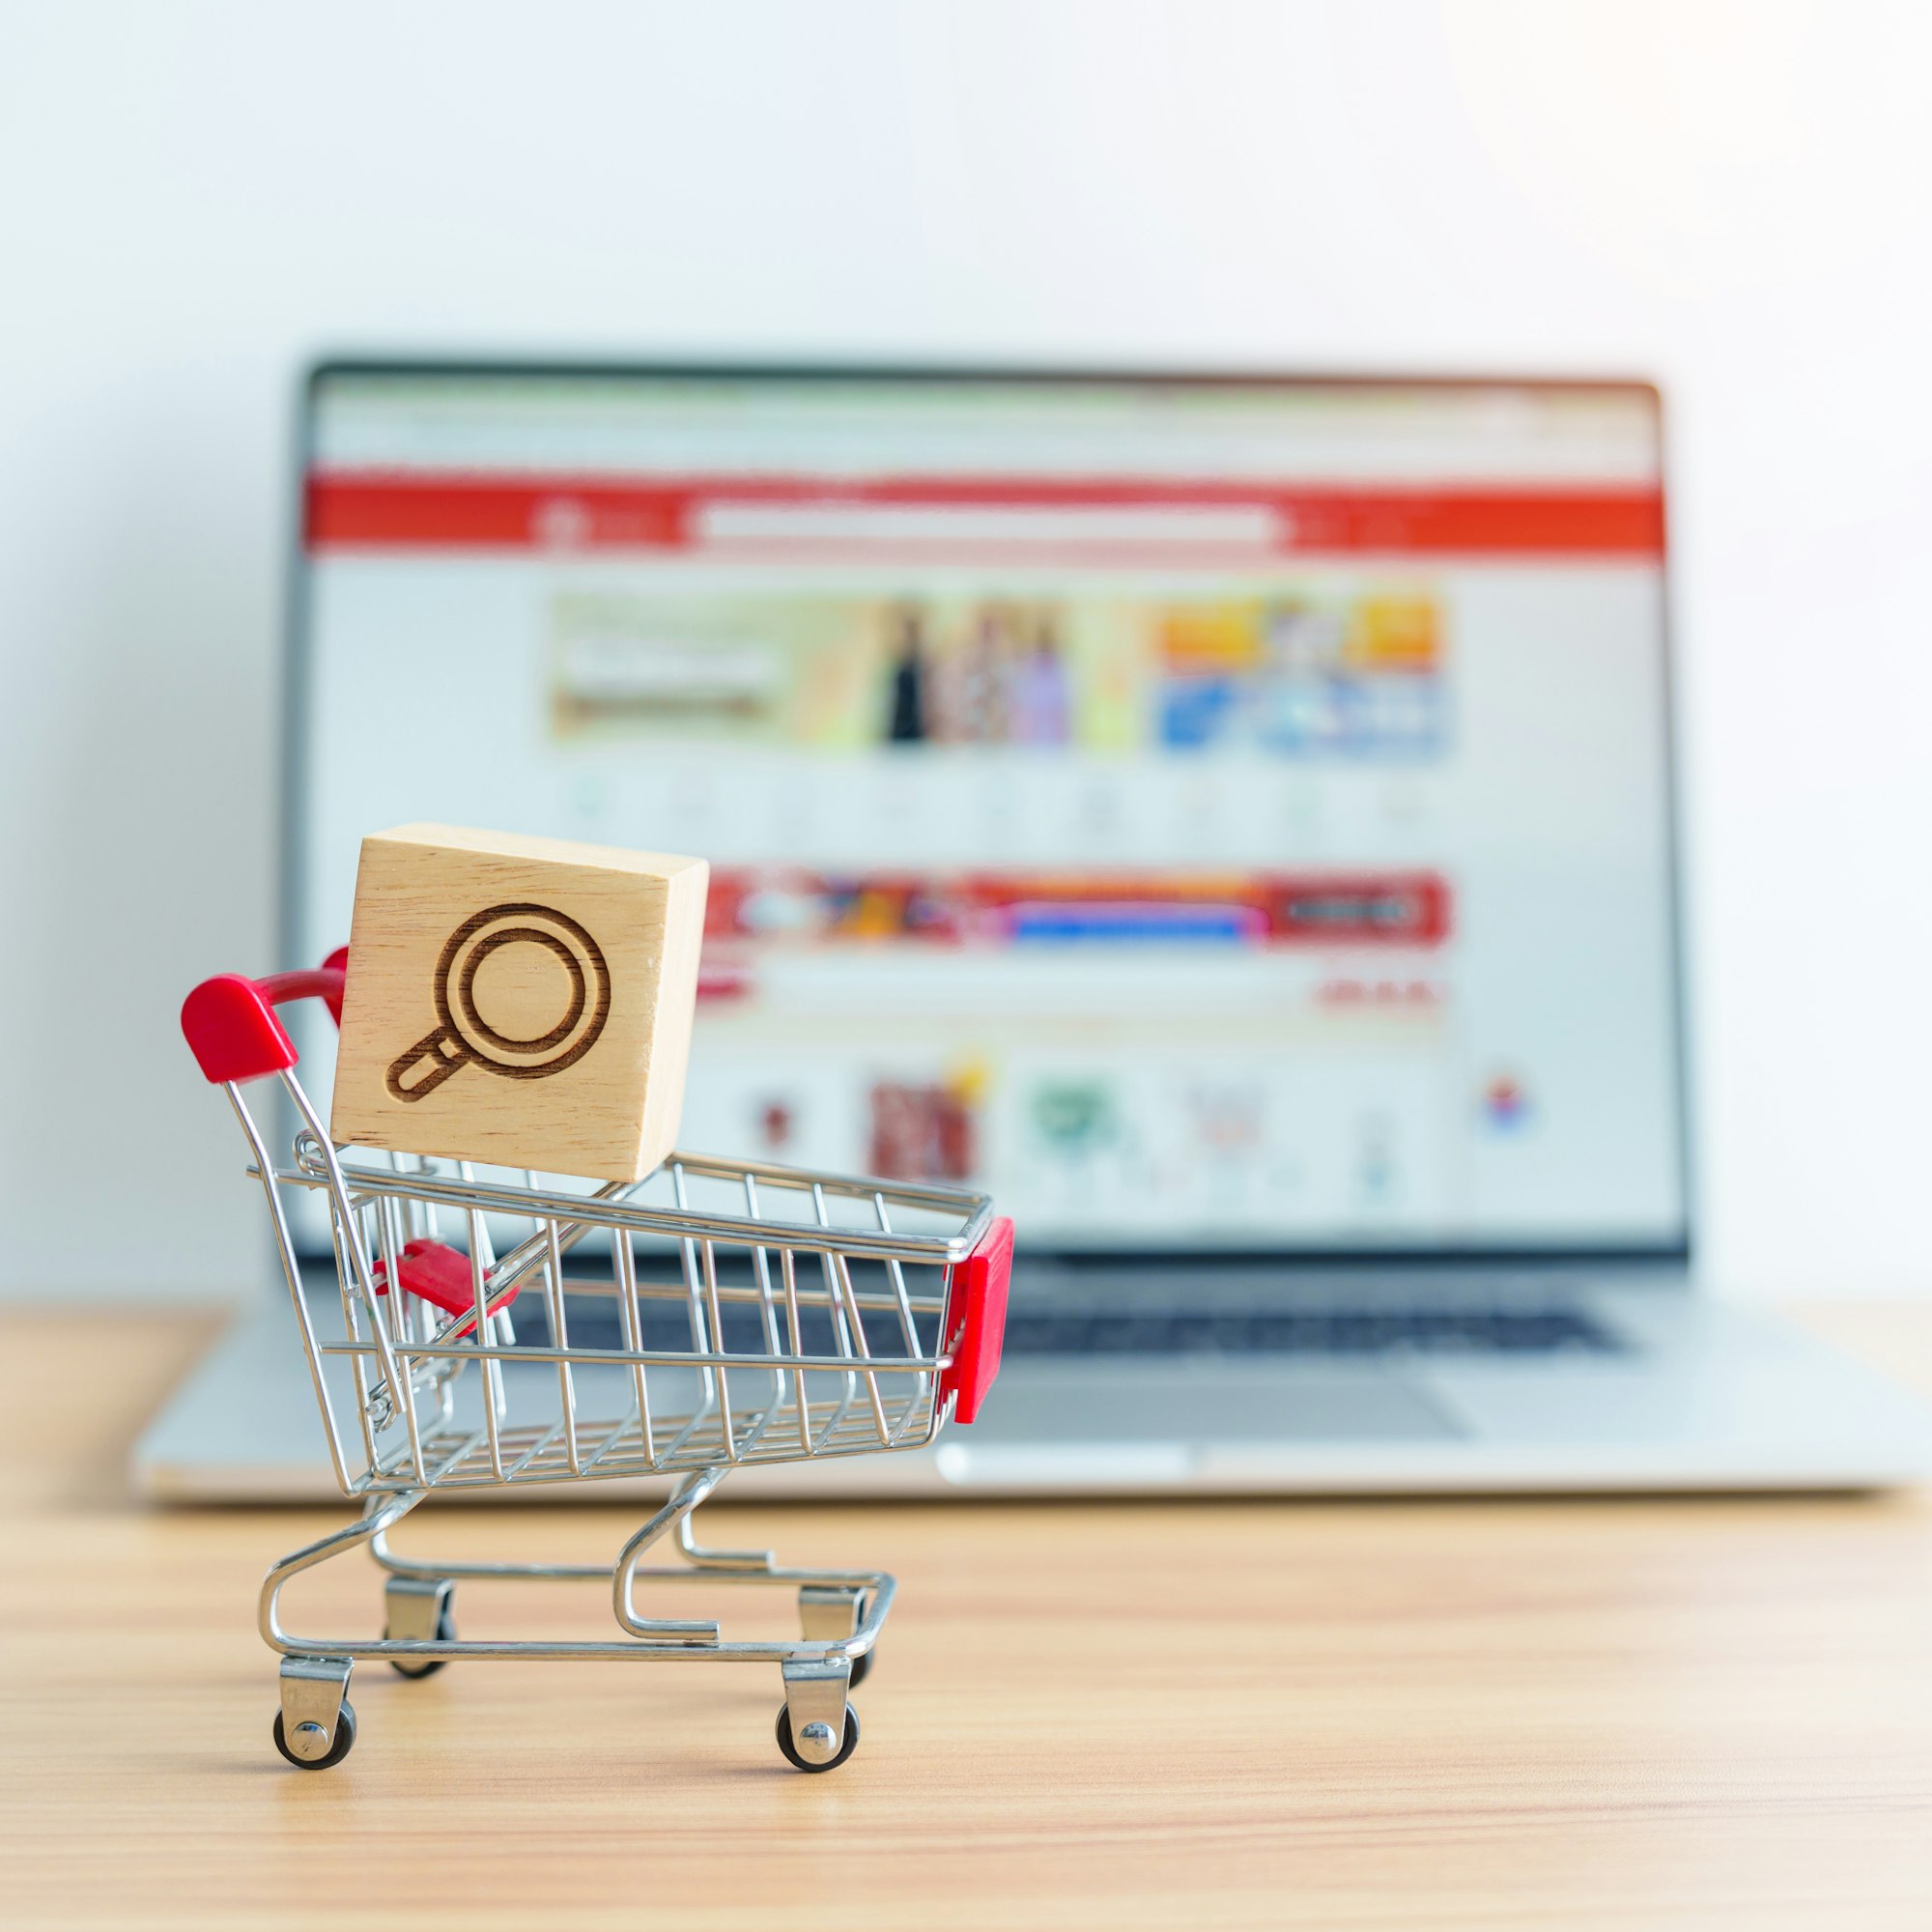 Shopping cart with Magnifying icon block and laptop computer